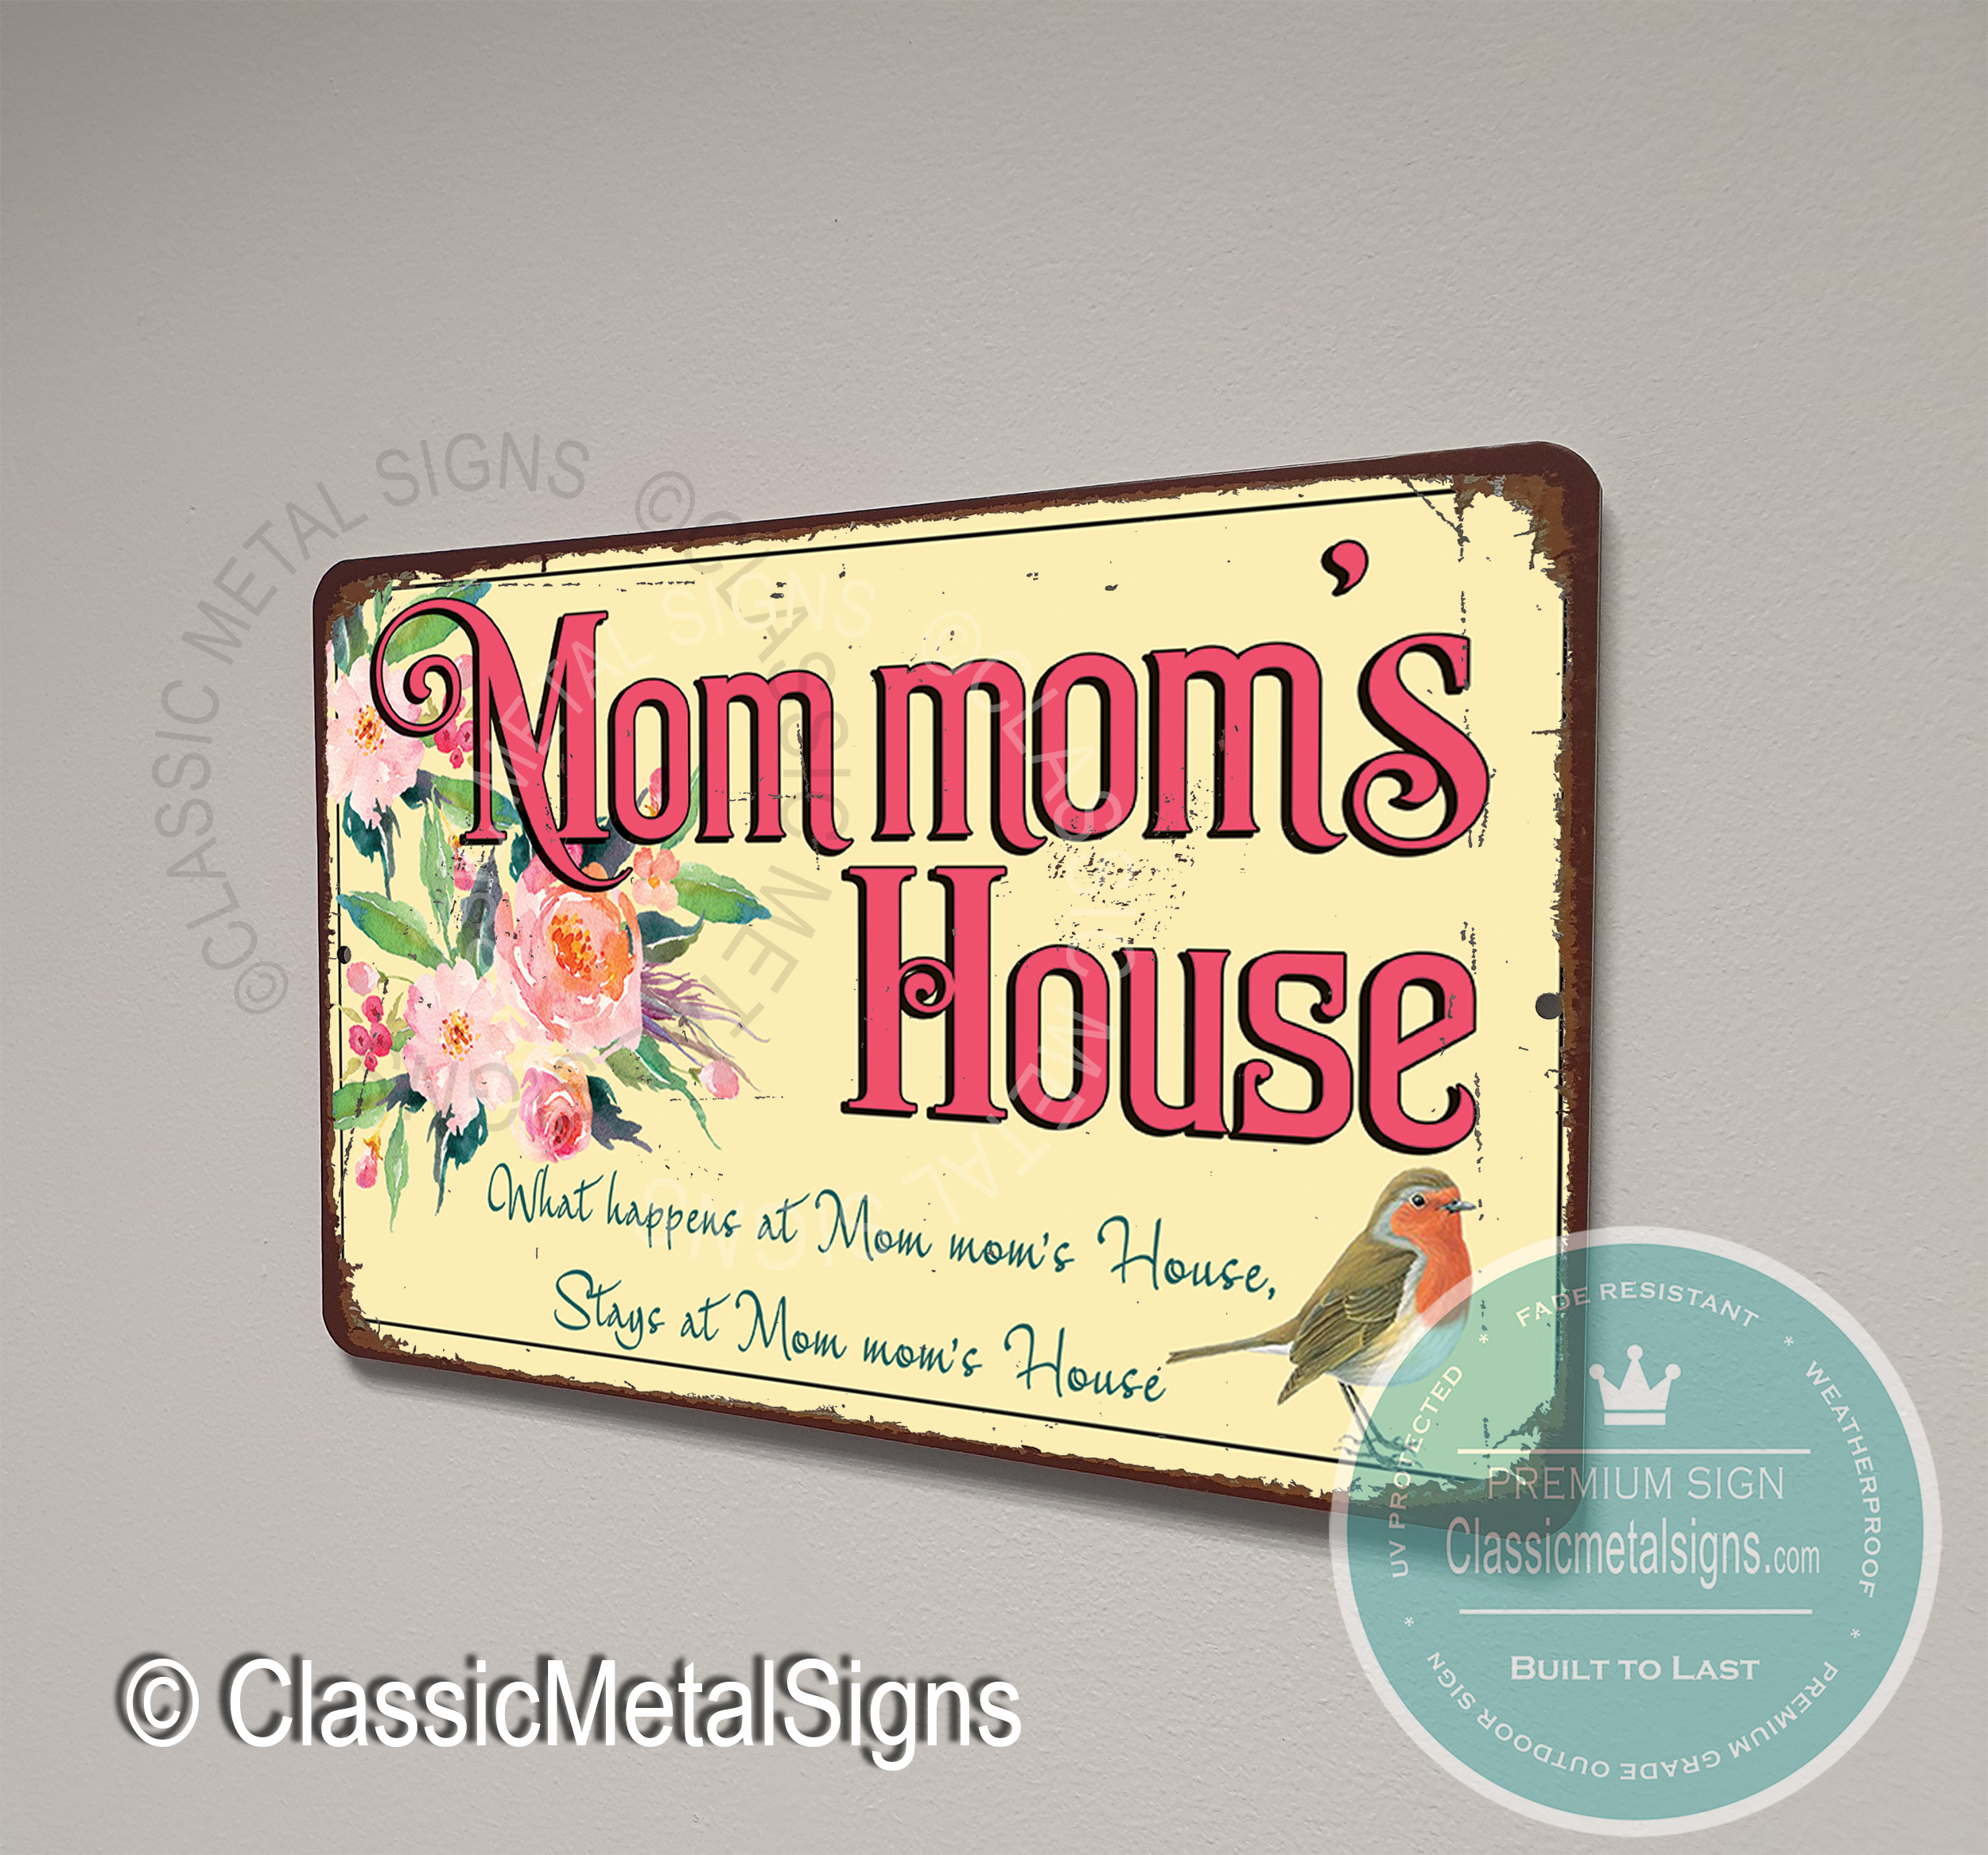 Mom mom's House Sign - Classic Metal Signs